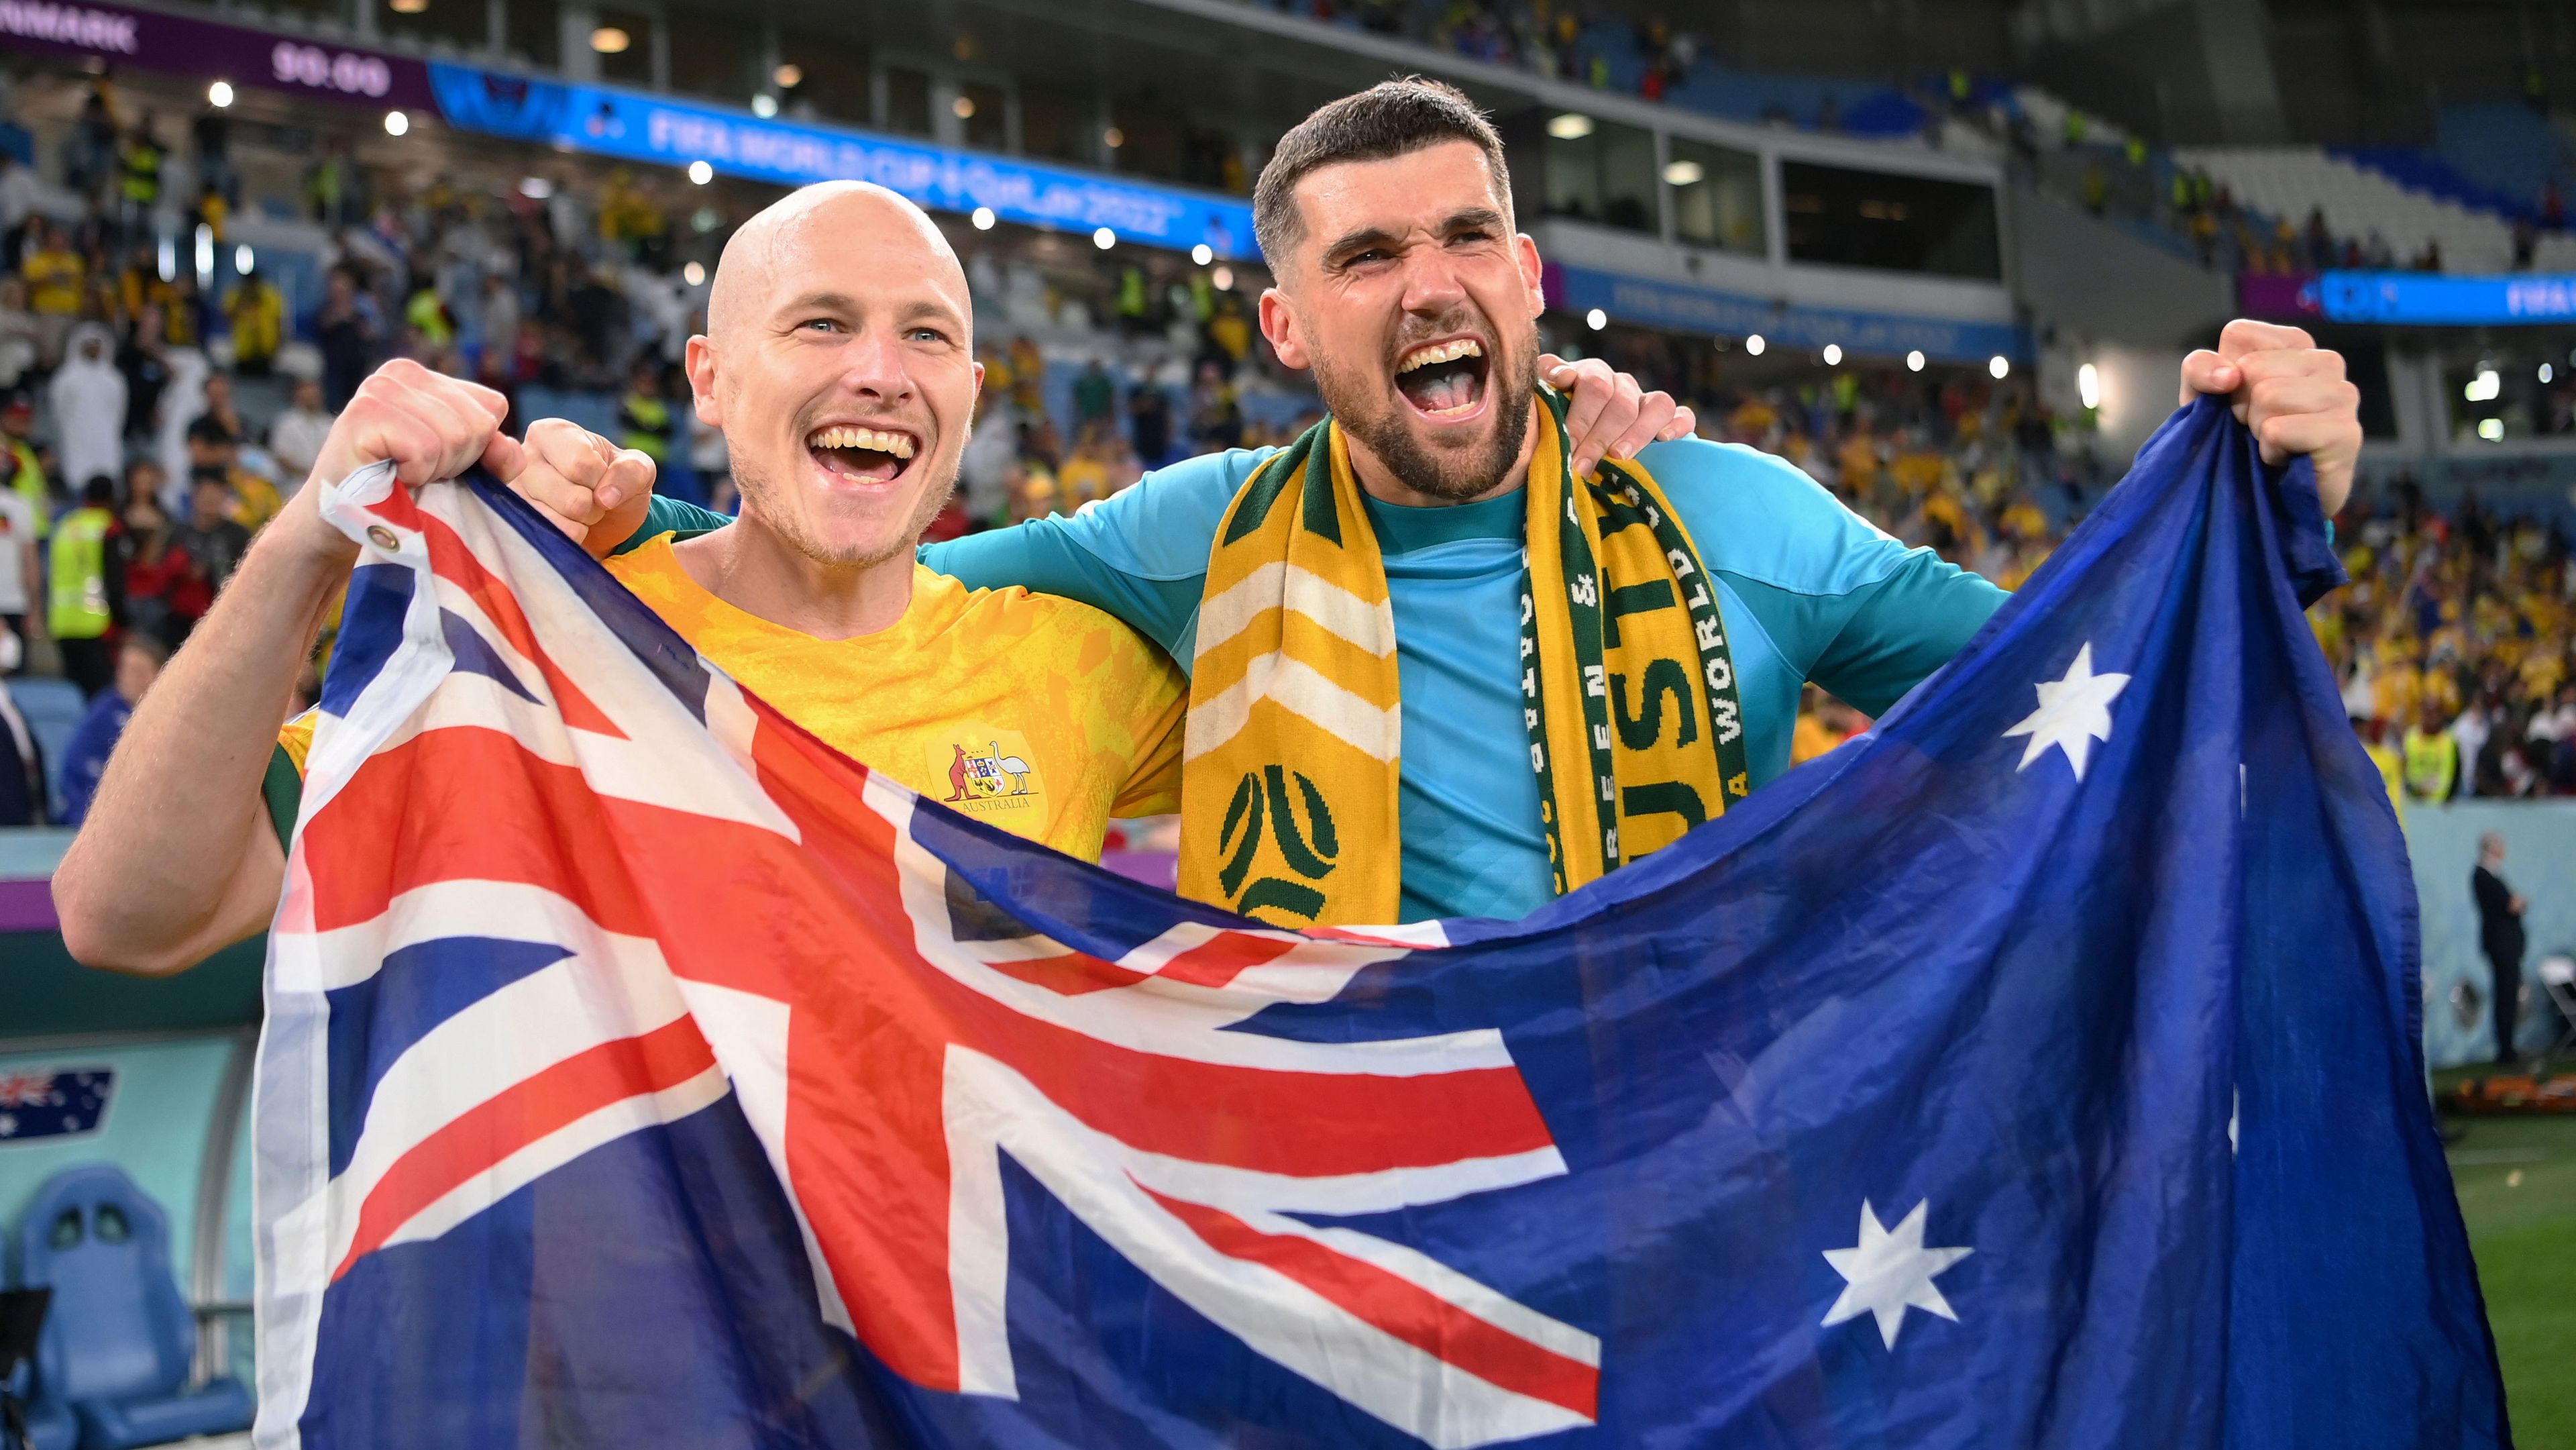 Aaron Mooy and Mathew Ryan celebrate their FIFA World Cup win over Denmark that qualified Australia for the last 16.